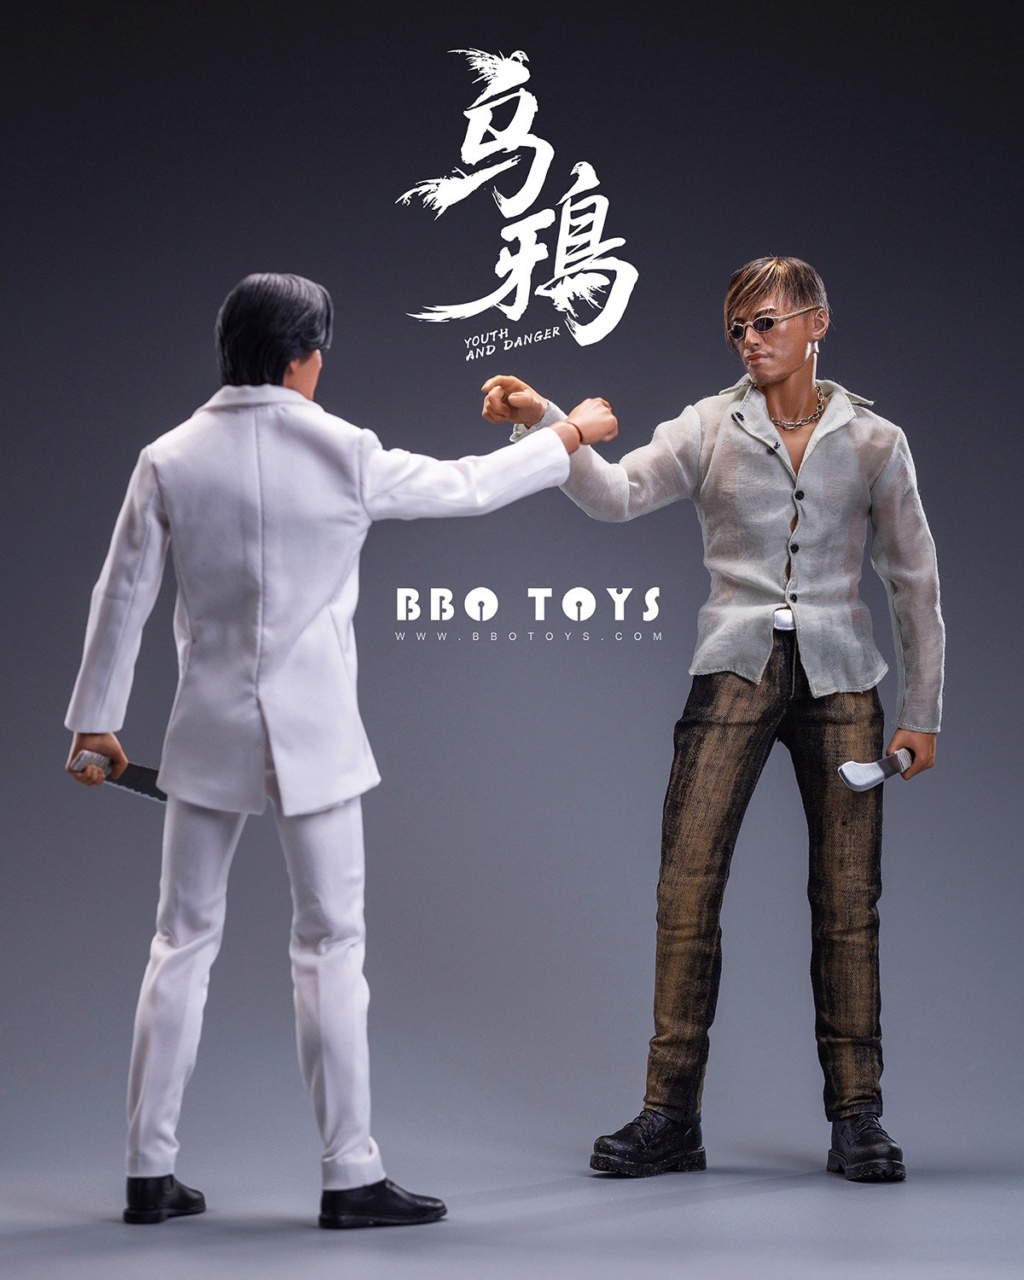 NEW PRODUCT: BBOTOYS: 1/6 Ancient and mysterious series Crow Glory GHZ004 8f1cce10